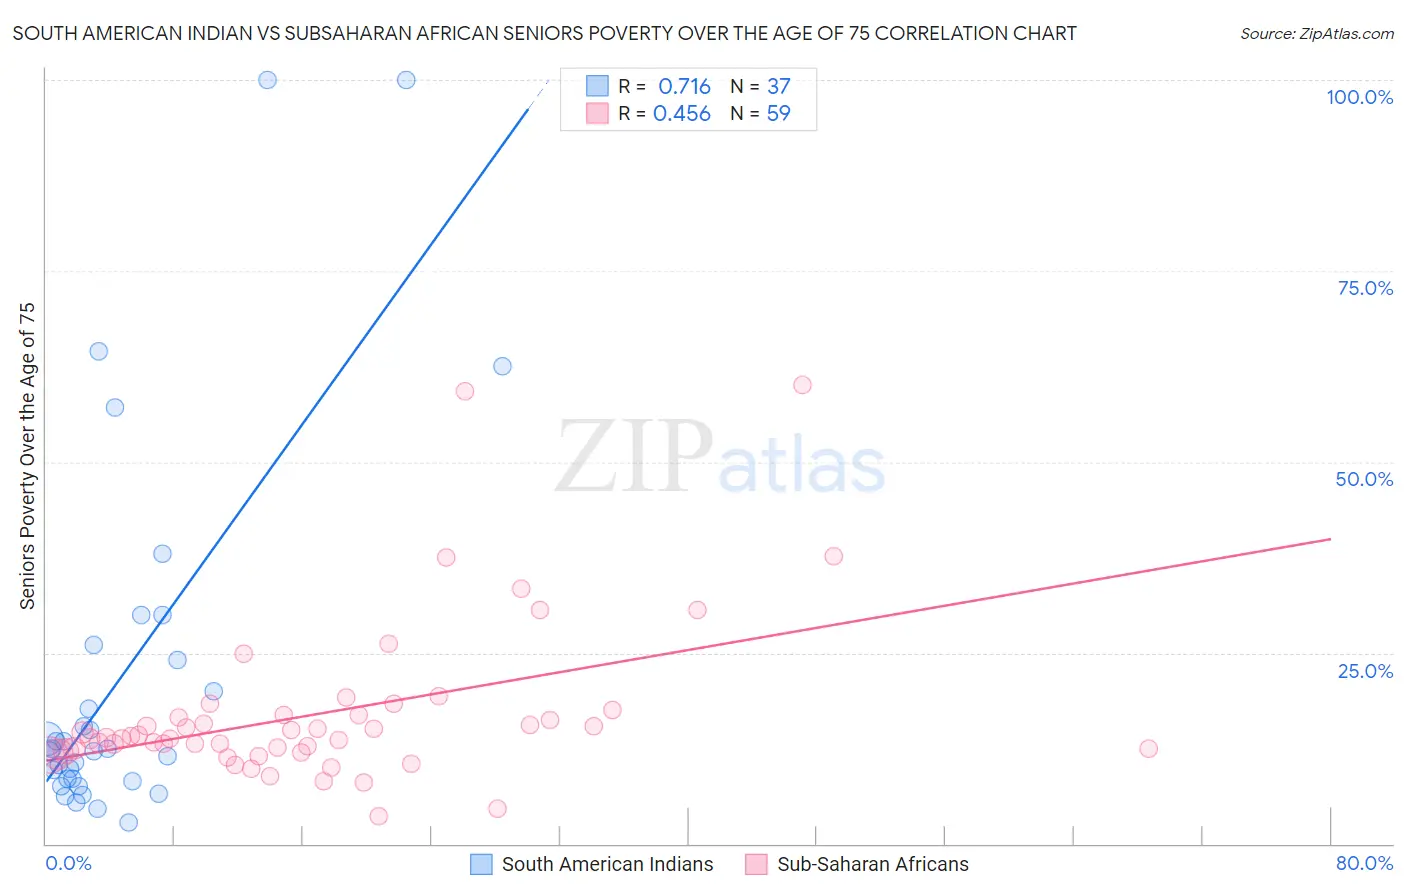 South American Indian vs Subsaharan African Seniors Poverty Over the Age of 75